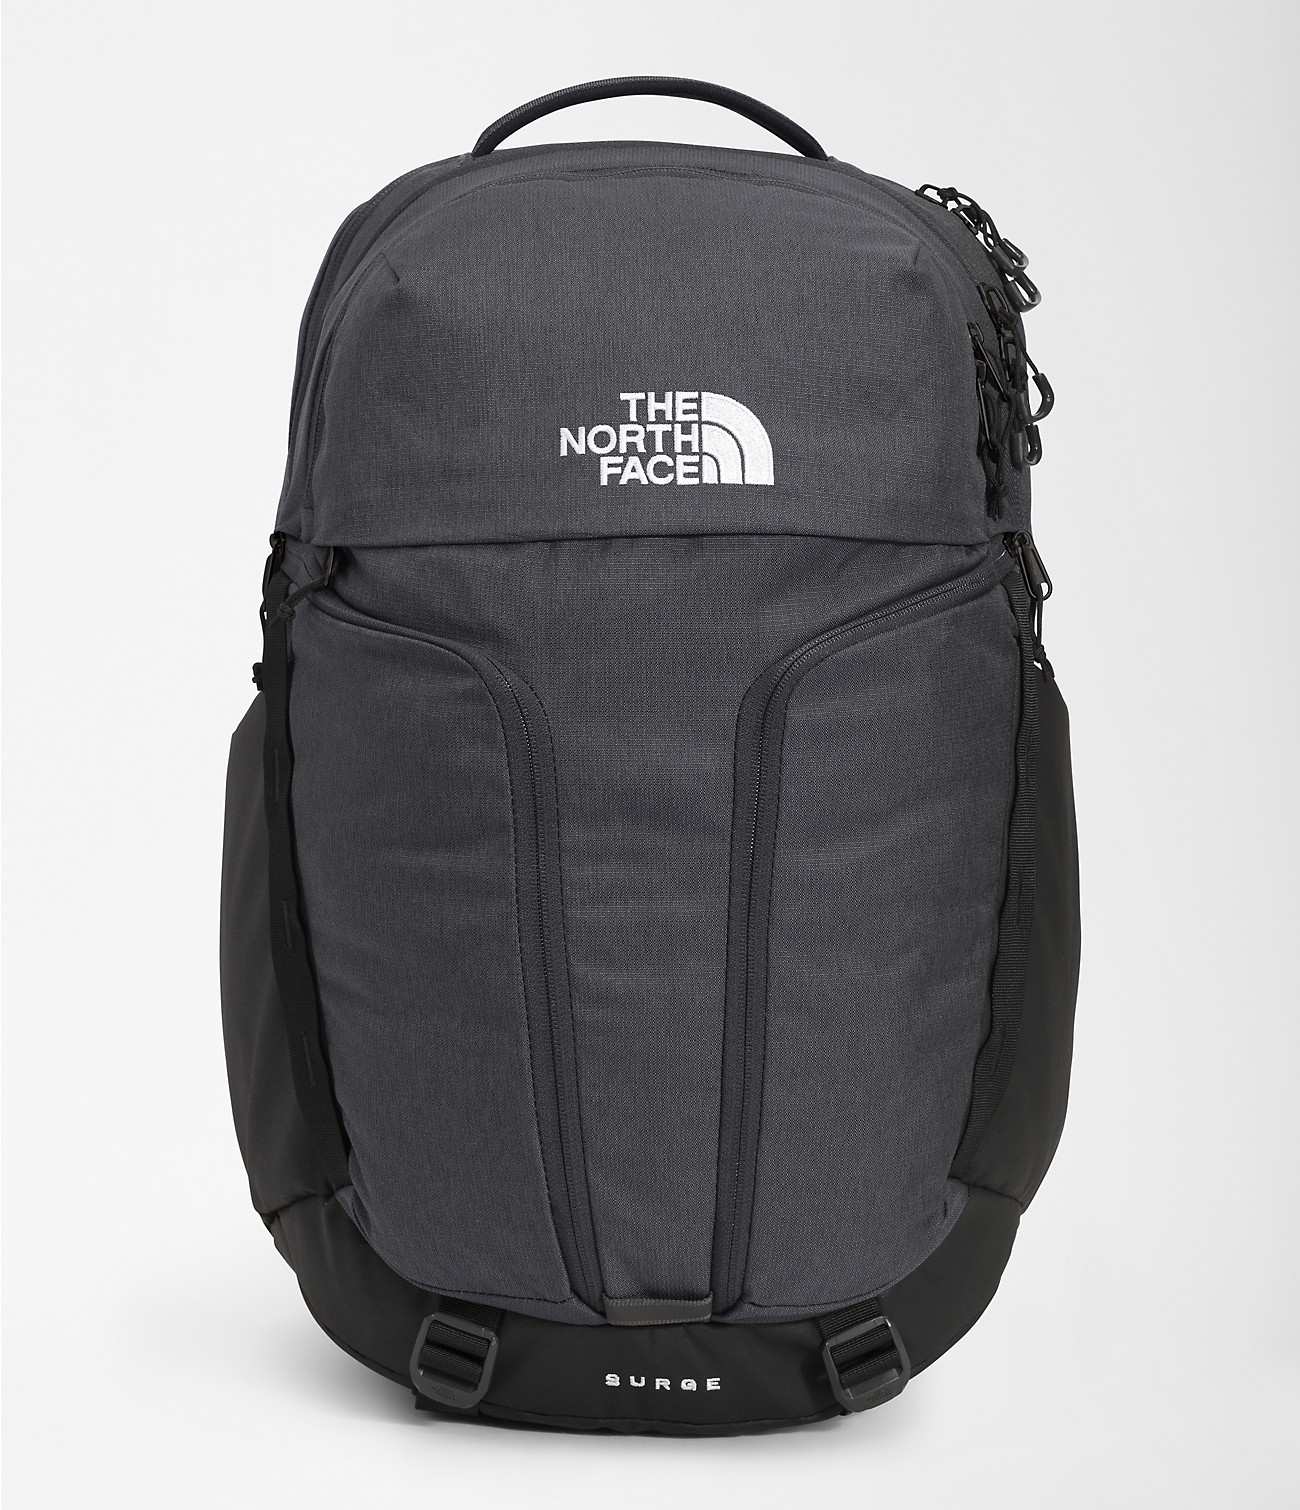 Unlock Wilderness' choice in the Herschel Vs North Face comparison, the Surge Backpack by The North Face